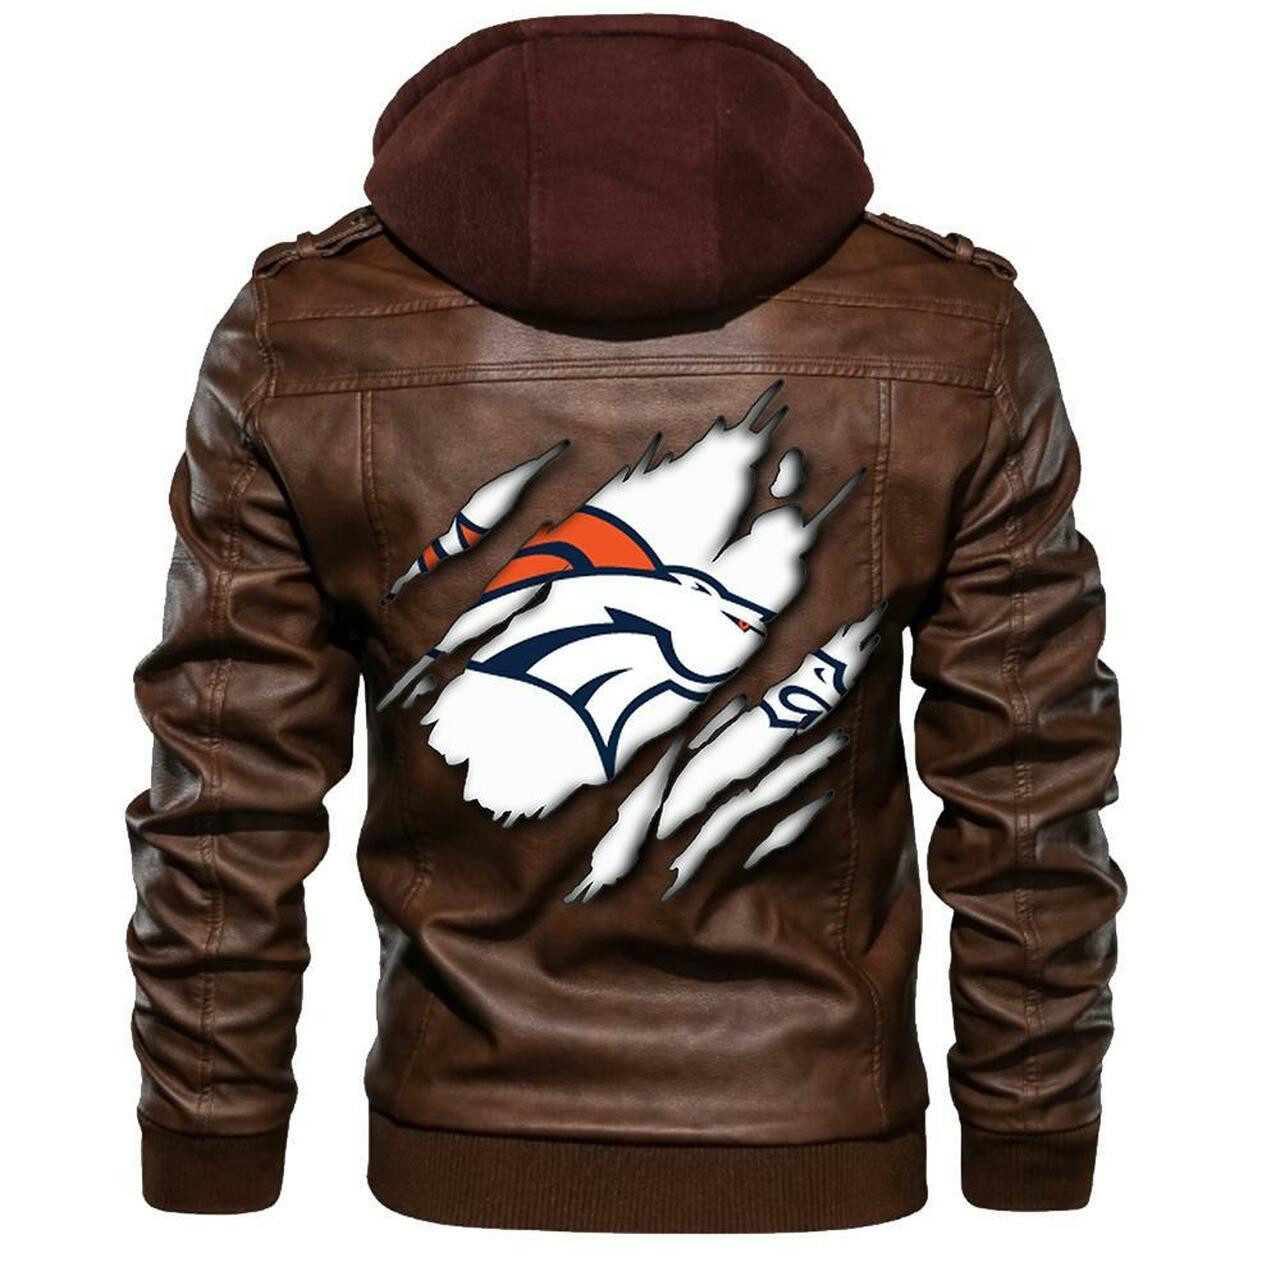 If you're looking for a new leather jacket this season - keep reading! 285